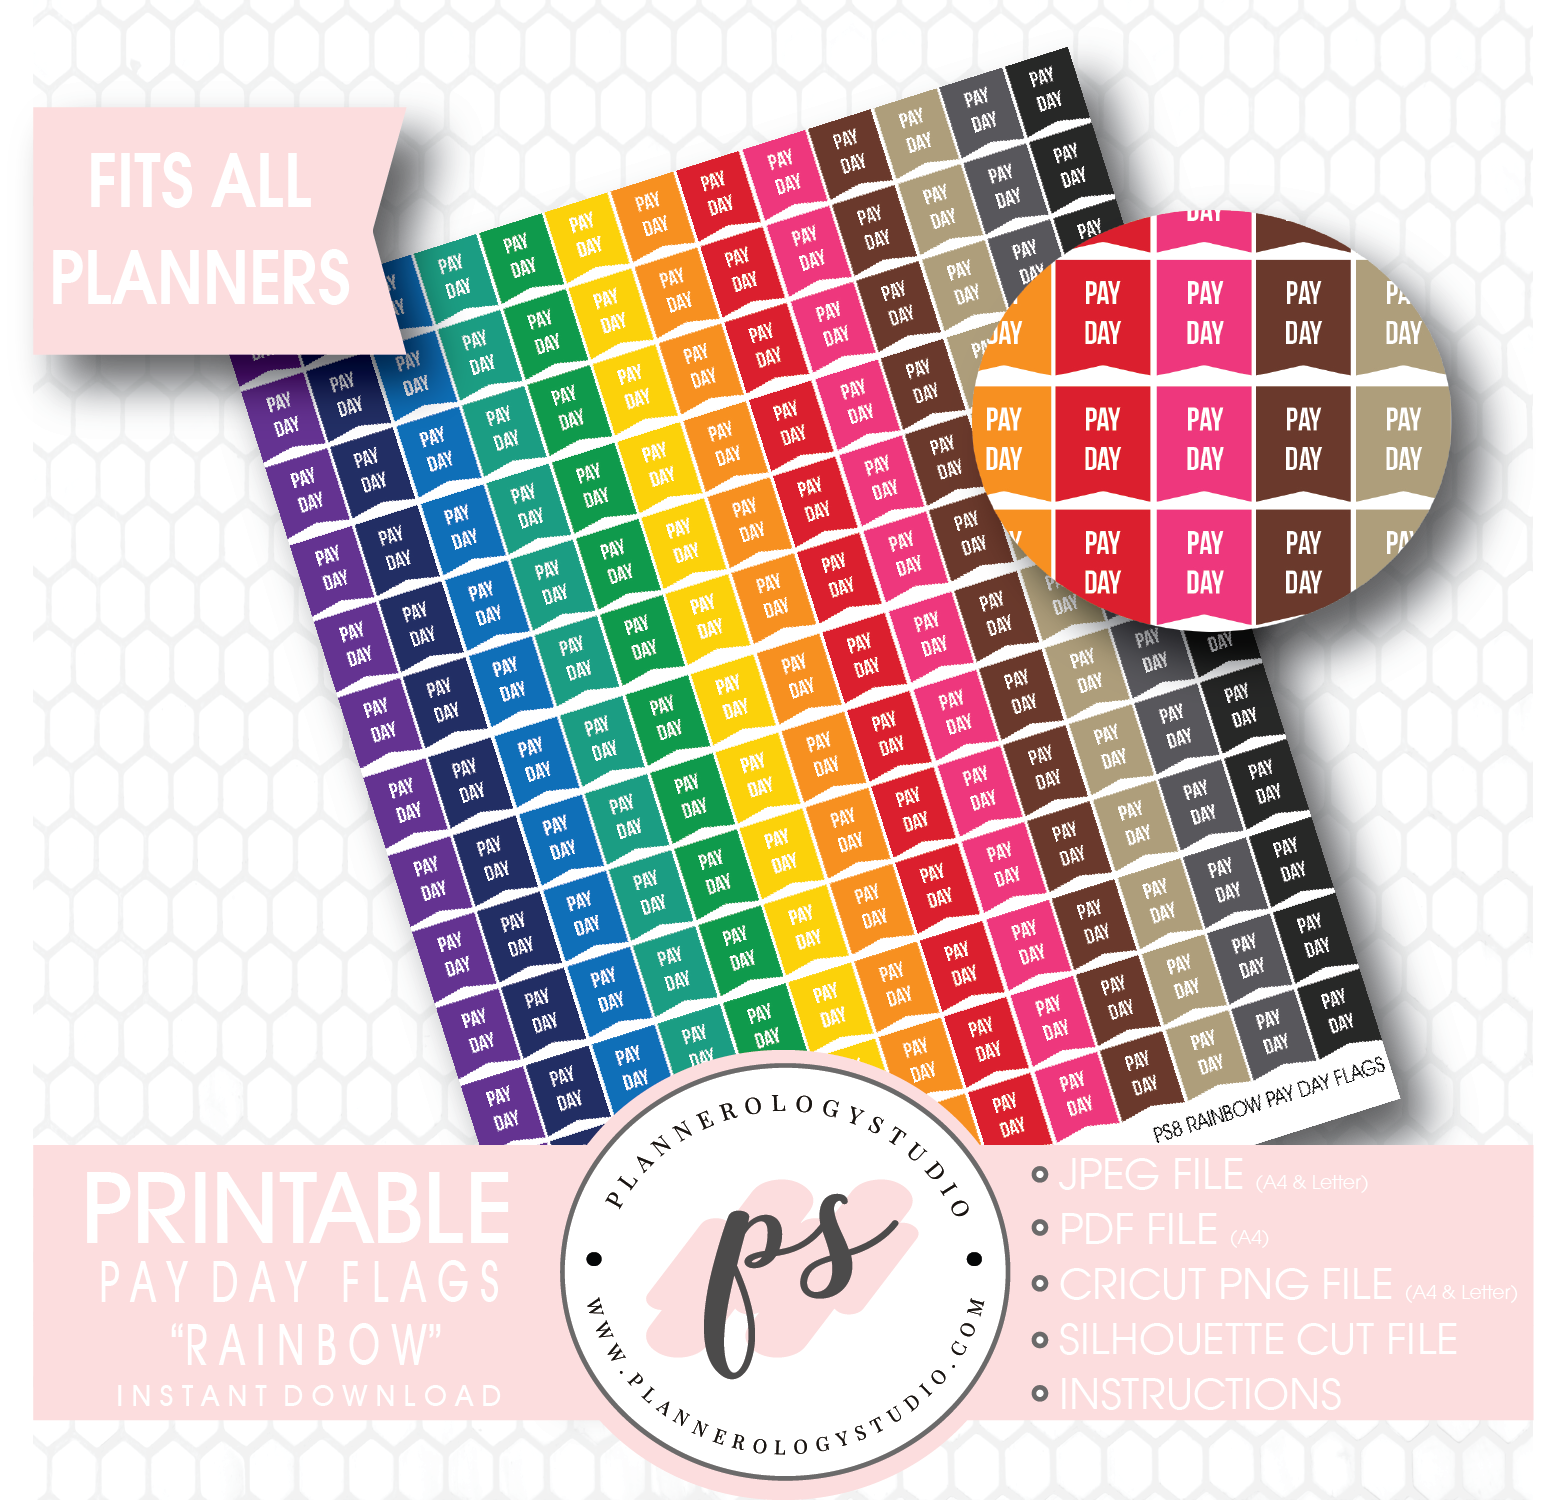 Rainbow Pay Day Flags Printable Planner Stickers - Plannerologystudio